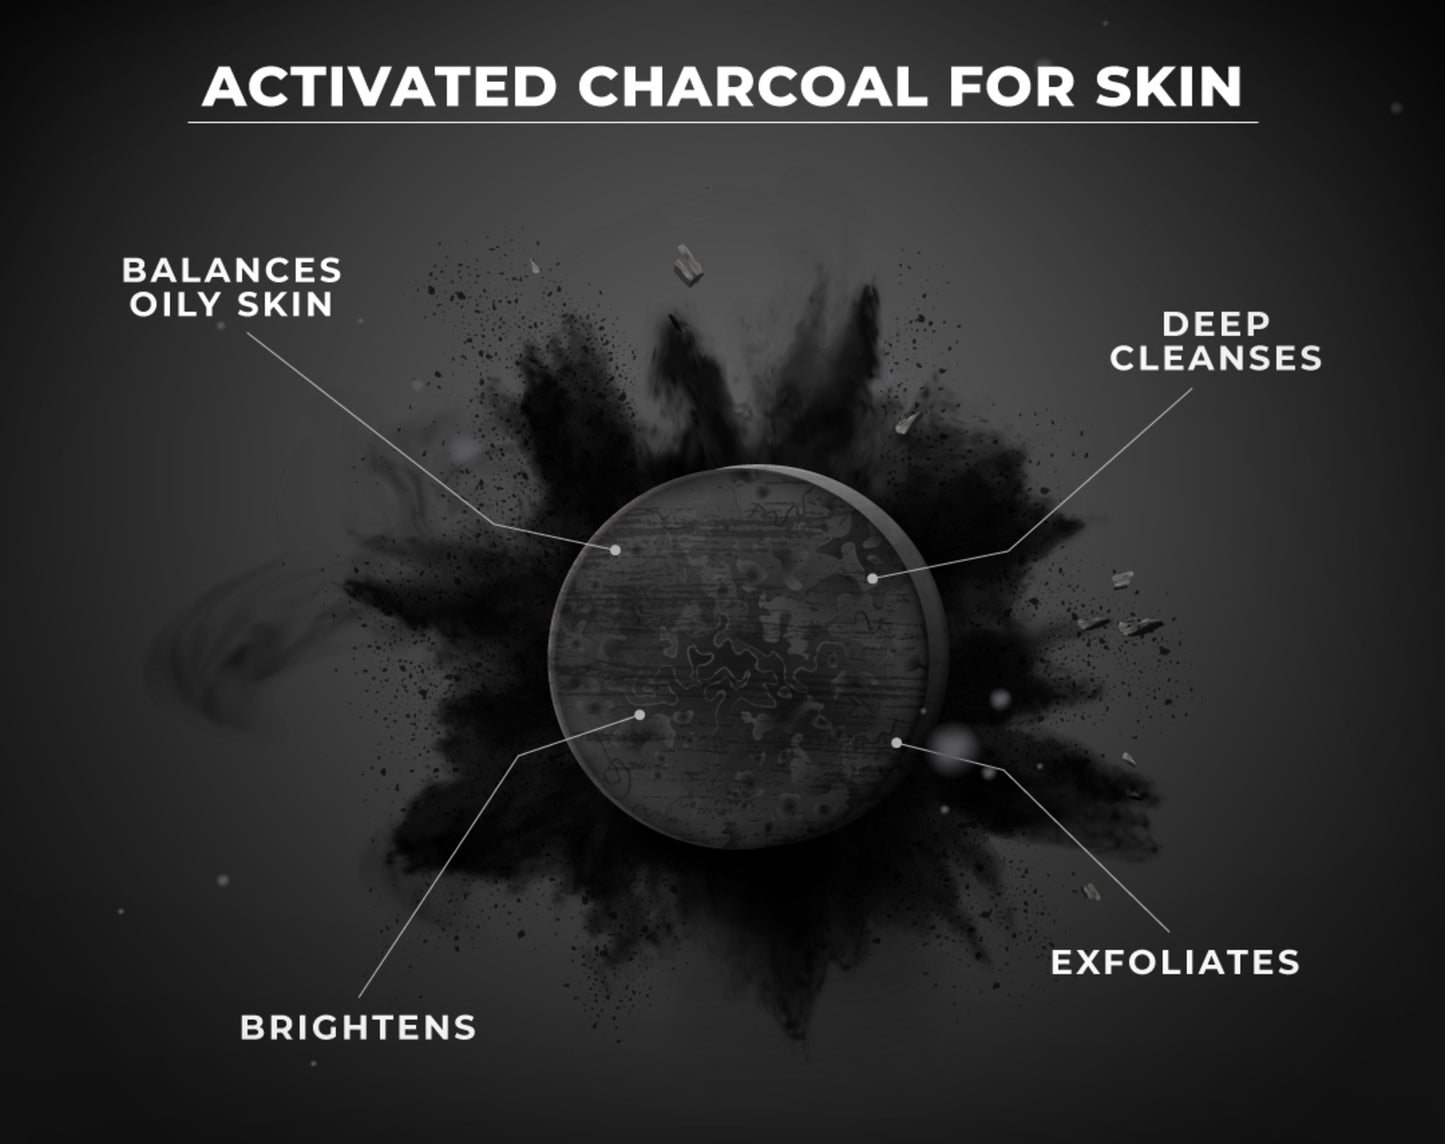 charcoal, balances oily skin, activated charcoal, brightens, exfoliates, charcoal benefits for skin